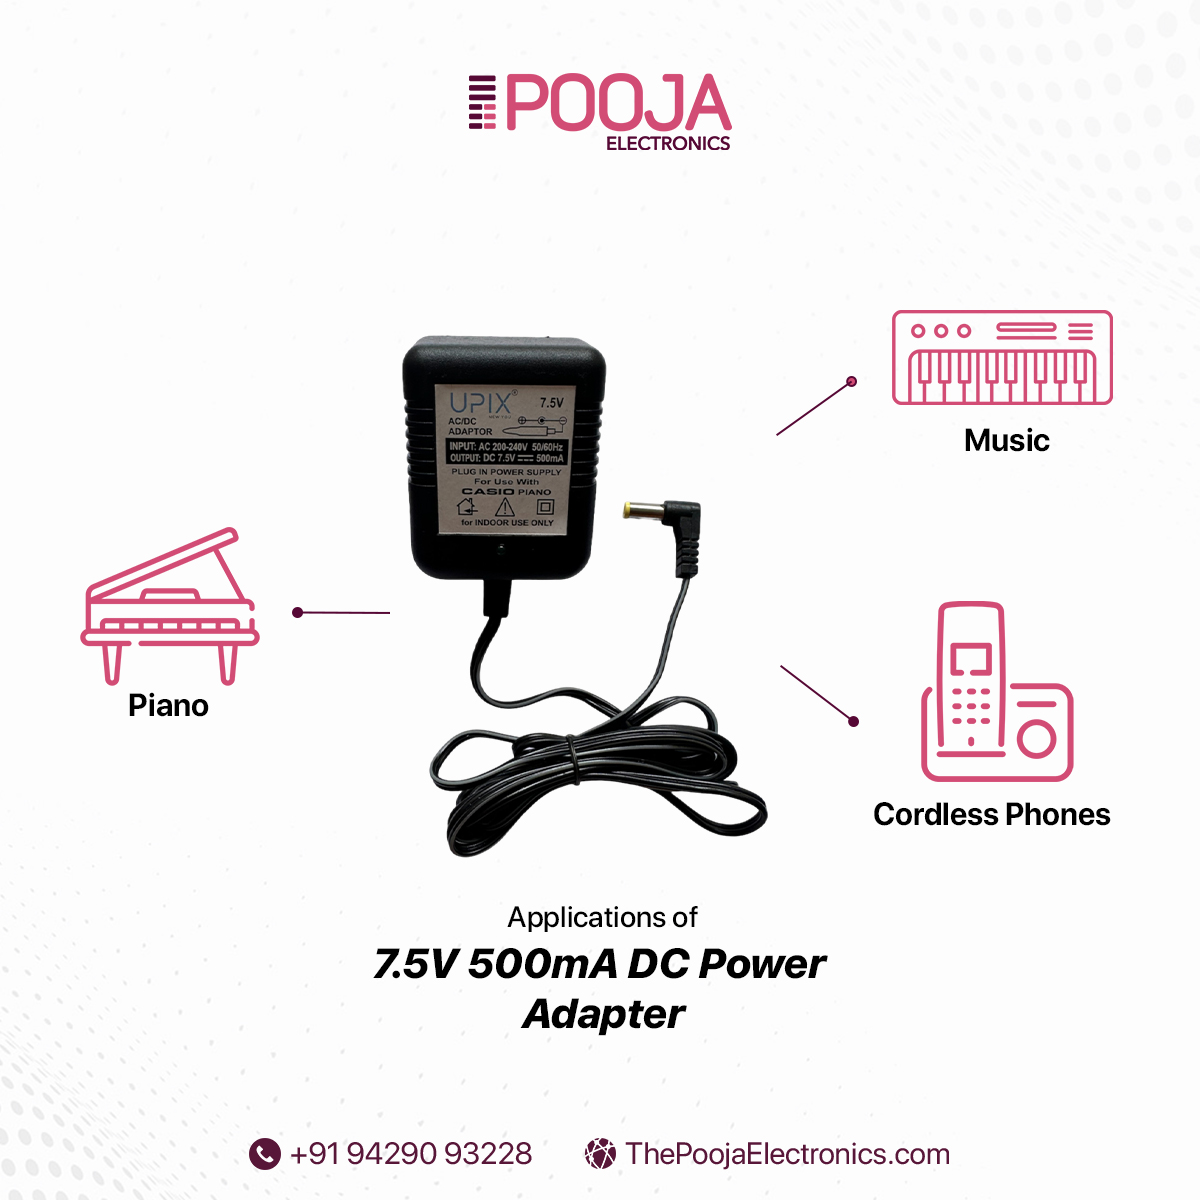 Experience uninterrupted performance with the Pooja Electronics 7.5V 500mA DC Power Adapter. Your devices deserve the best, and we deliver excellence every time!
.
#poojaelectronics #PowerWithPeaceOfMind #ContinuousPower #StayConnected #acremote #caraudioremote #supplieroftheyear